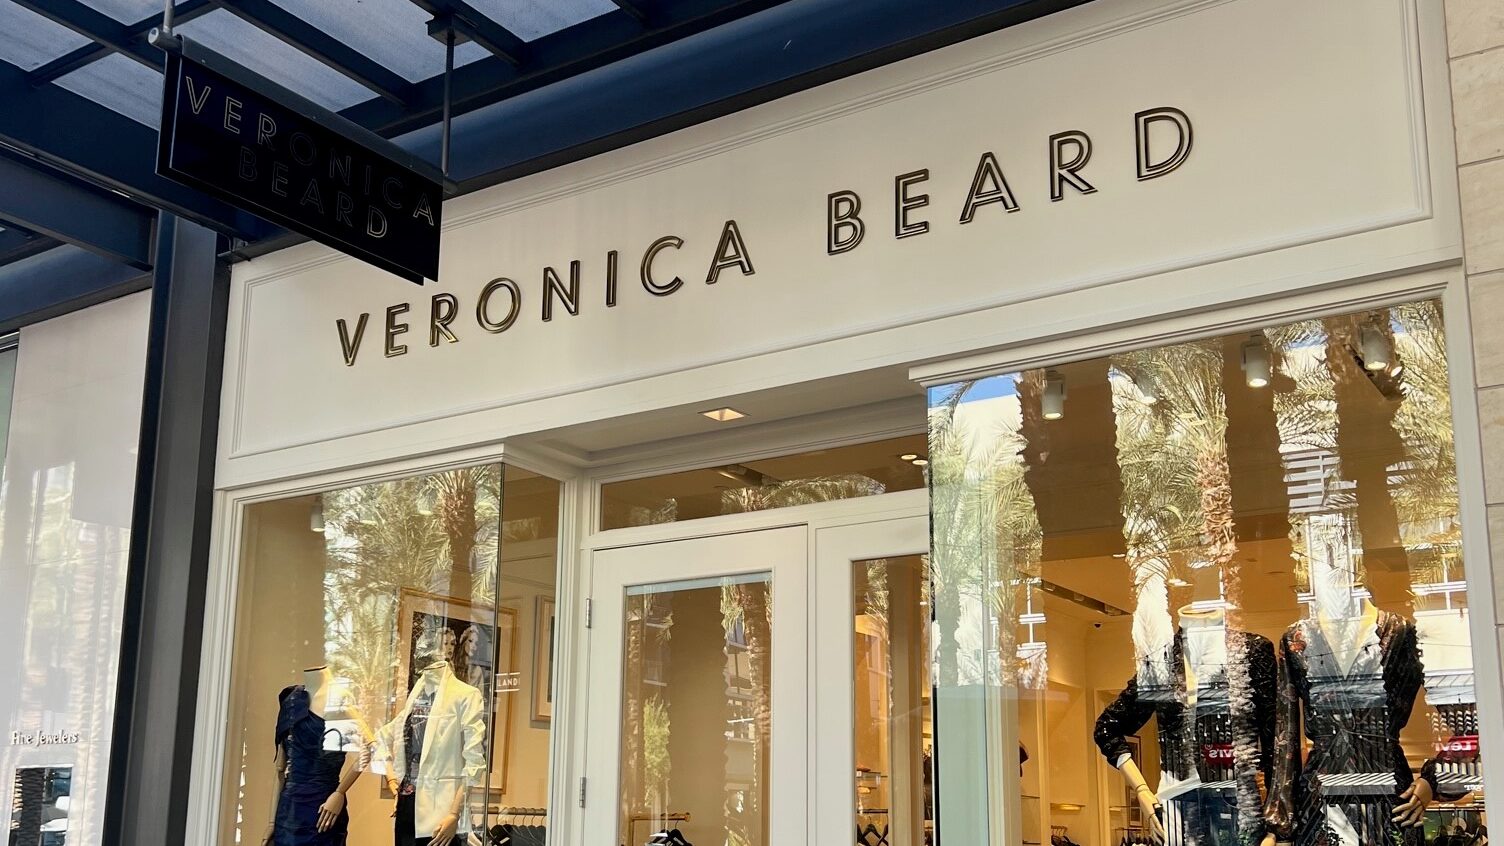 exterior view of the Veronica Beard store at Scottsdale Quarter